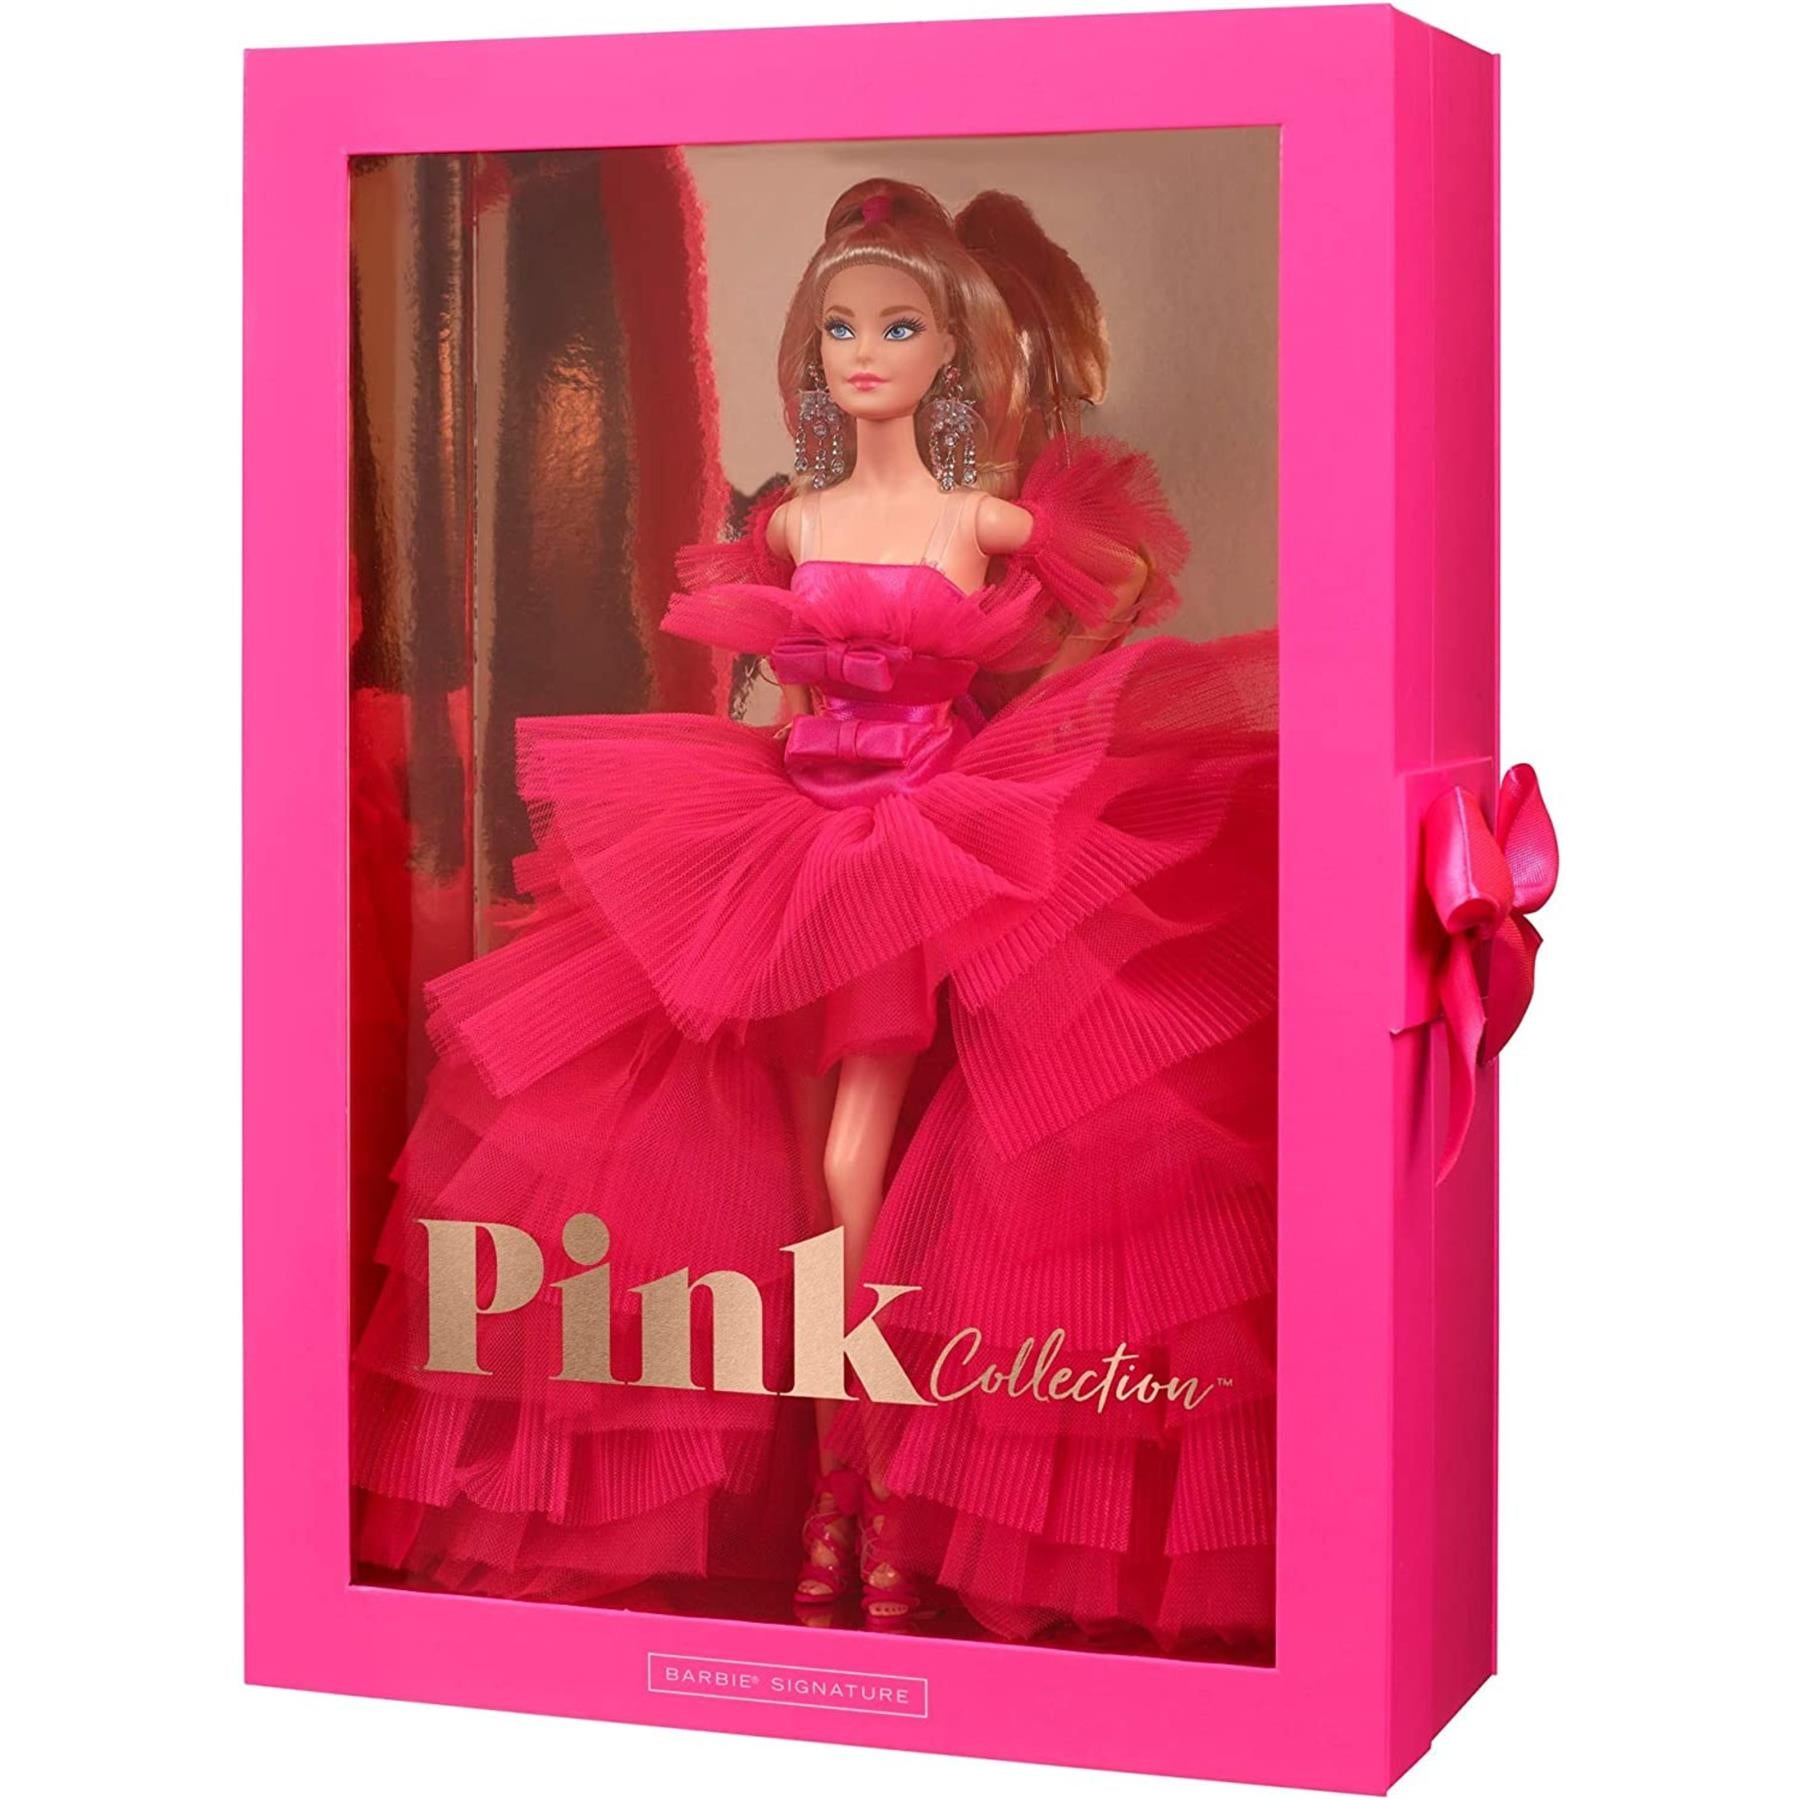 Barbie Barbie Pink Collection Doll – Pink Premiere, Barbie Signature Collectable Doll